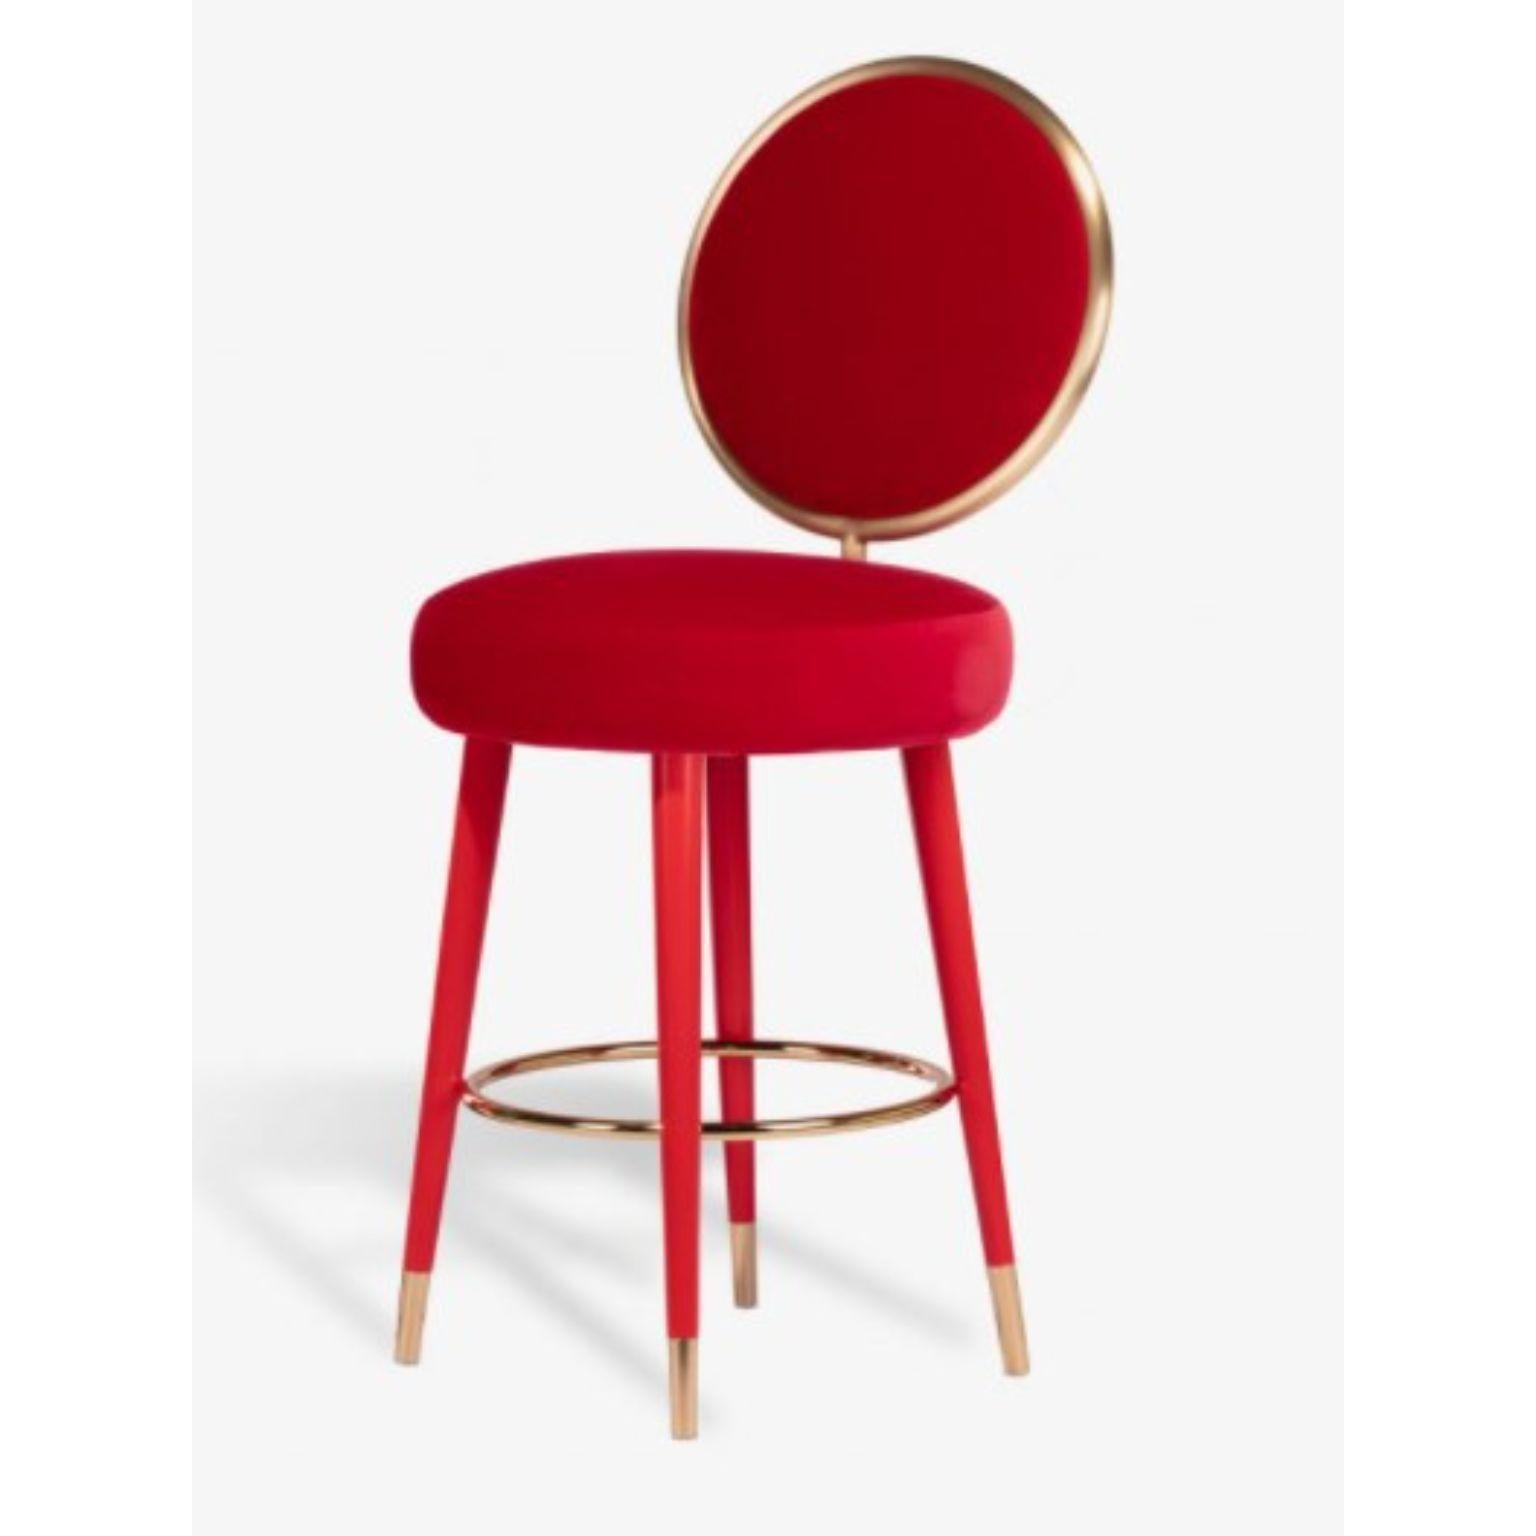 Graceful Counter stool red by Royal Stranger
Dimensions: D 48 x W 48 x H 110 cm
Materials: Velvet, Wood, Brass.
Weight: 10 kg

Finish options
Upholstery Available in all Royal Stranger’s fabric collection.
Available in COM (Client’s Own